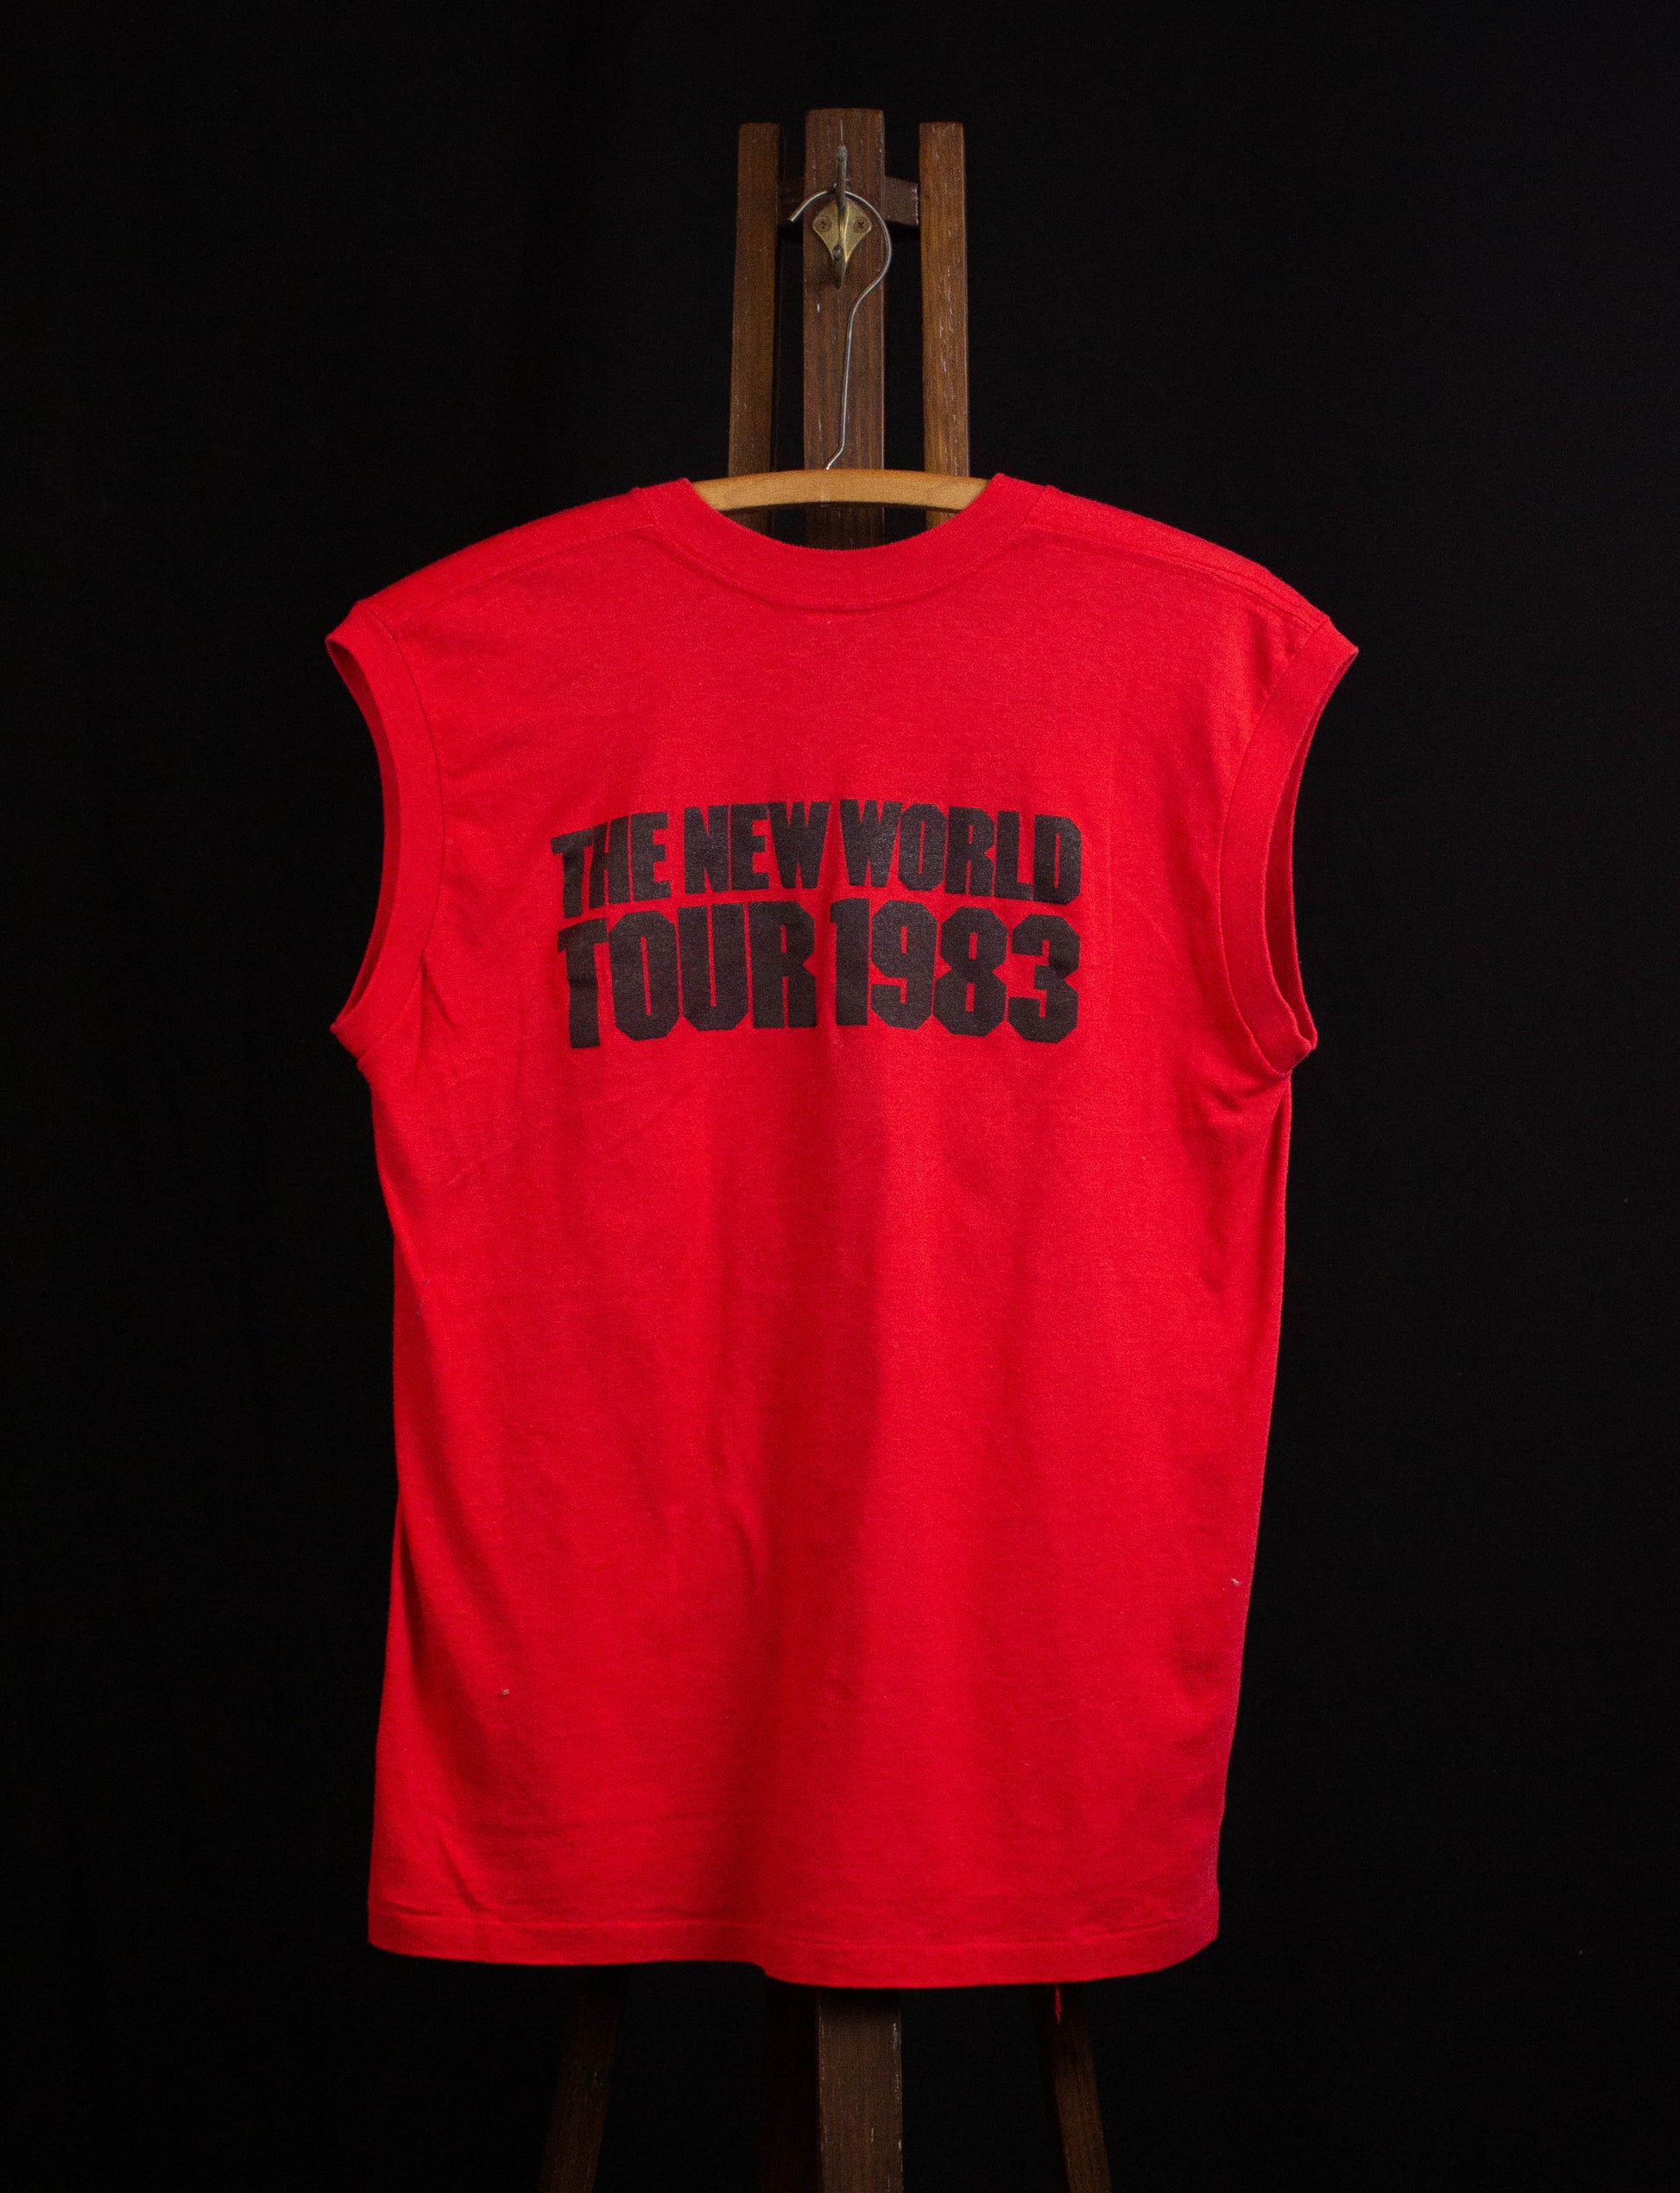 Vintage 1983 X "The New World" Tour Concert Muscle Shirt Large